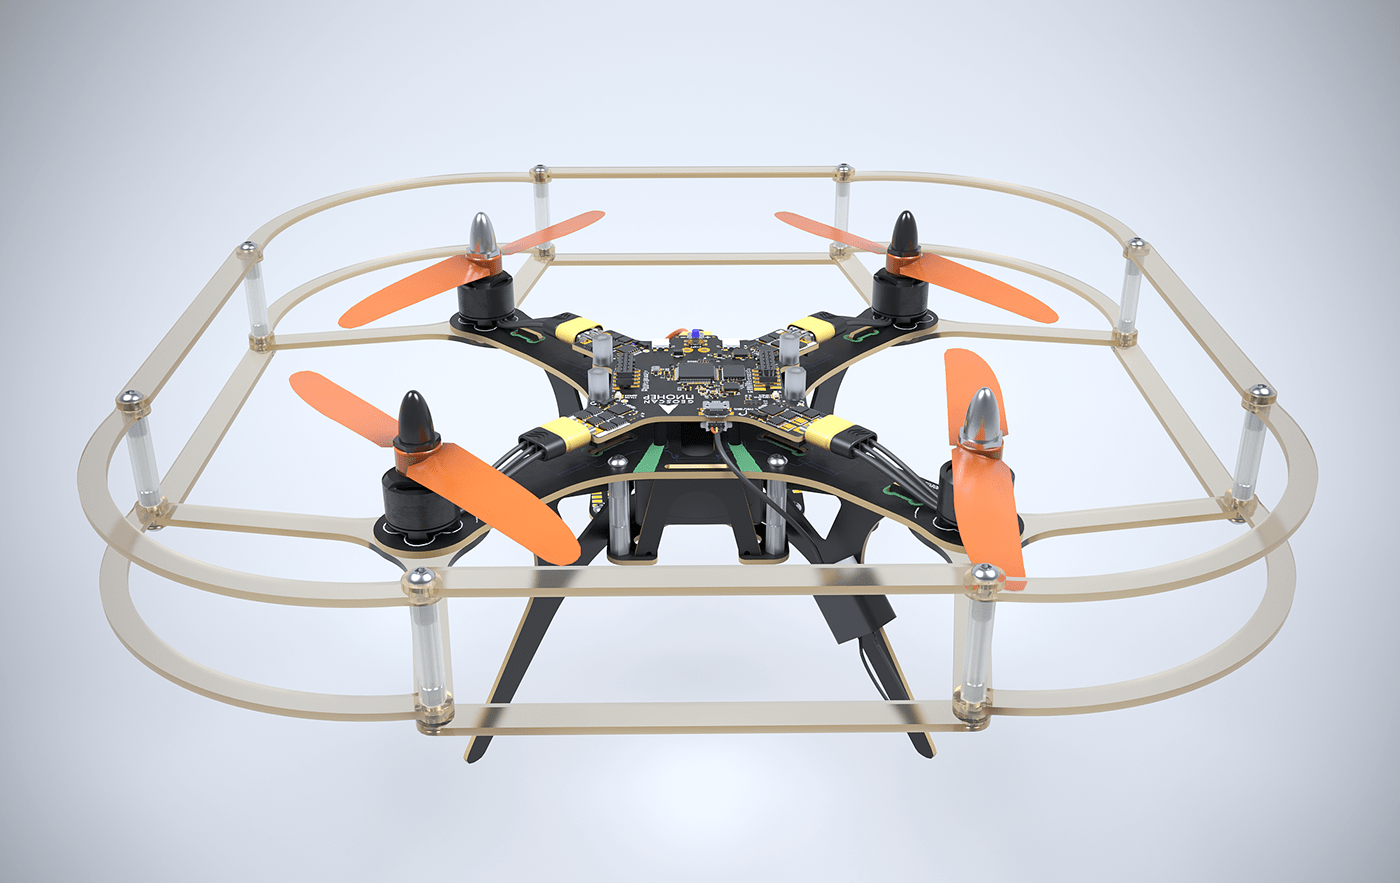 3d modeling 3ds max corona product design  quadrocopter Render rendering texturing UVW Mapping Vizualization